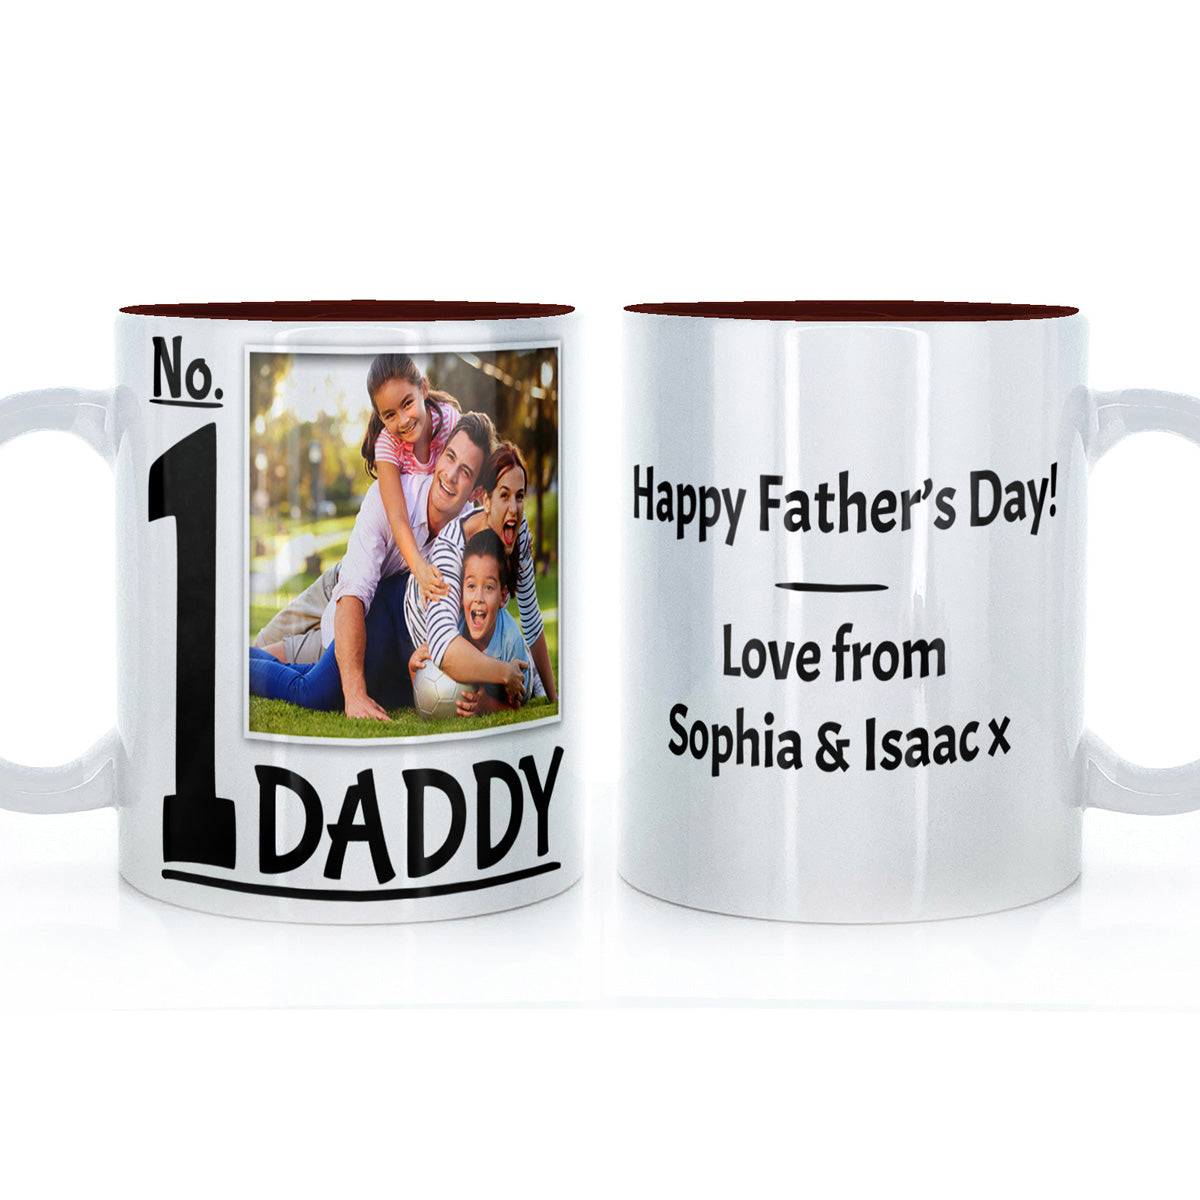 Personalised Father's Day Mug - Number 1 Dad Photo Upload